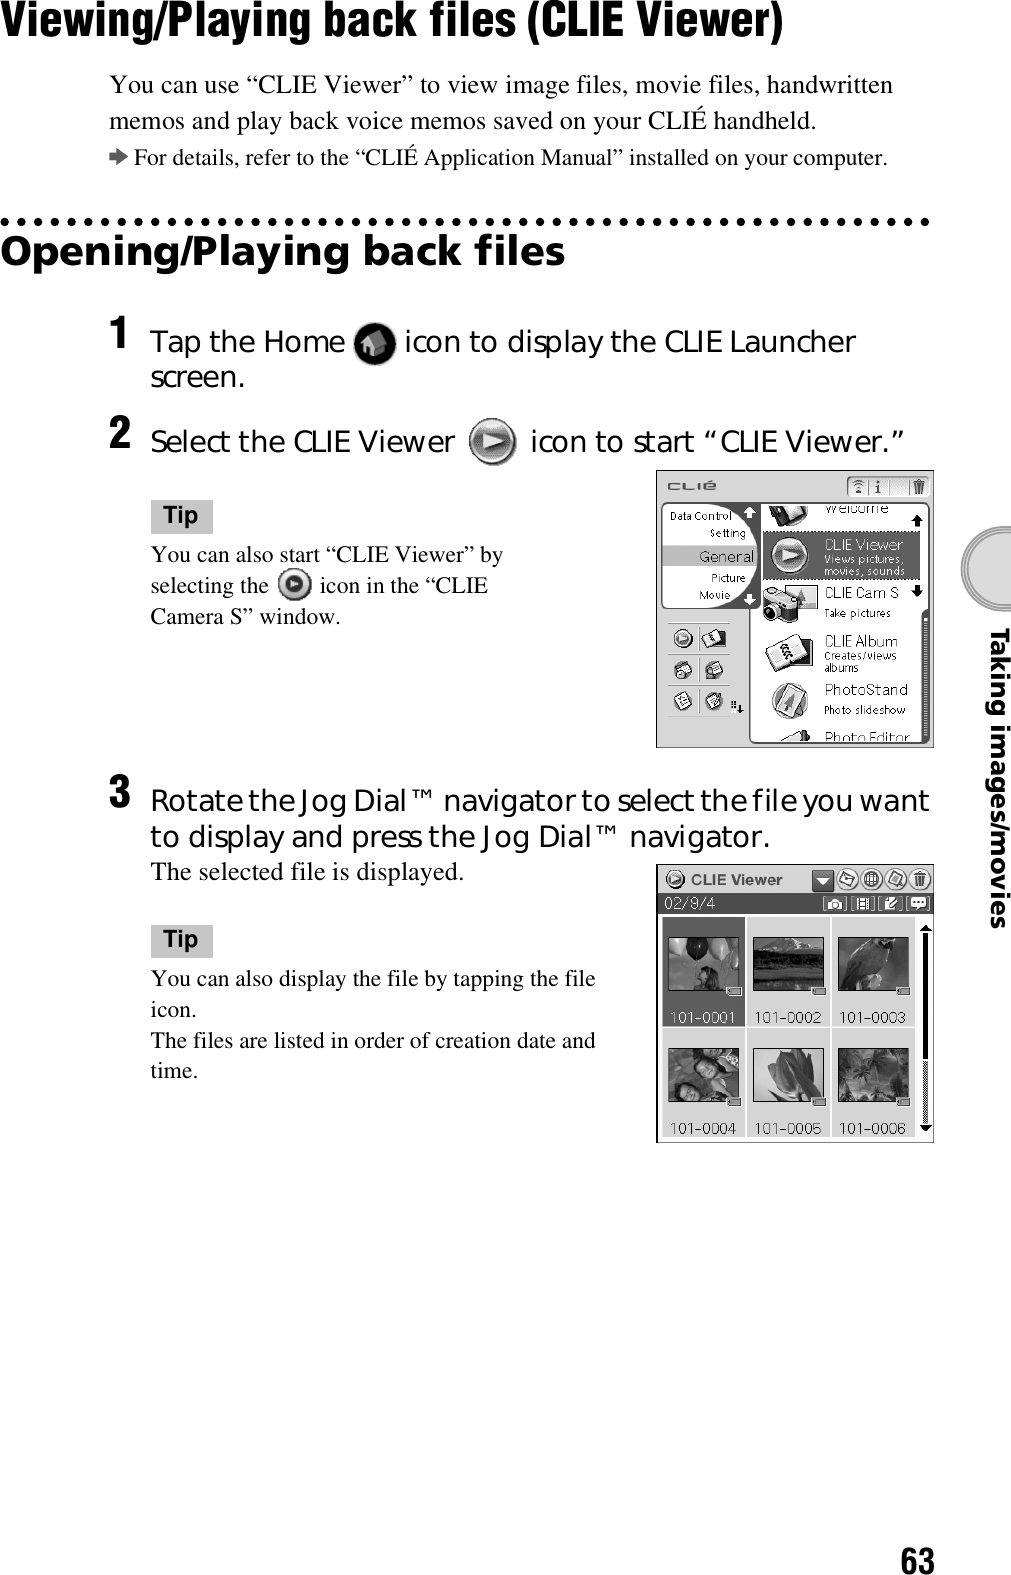 63Taking images/moviesViewing/Playing back files (CLIE Viewer)You can use “CLIE Viewer” to view image files, movie files, handwritten memos and play back voice memos saved on your CLIÉ handheld.bFor details, refer to the “CLIÉ Application Manual” installed on your computer.Opening/Playing back files1Tap the Home   icon to display the CLIE Launcher screen.2Select the CLIE Viewer   icon to start “CLIE Viewer.”TipYou can also start “CLIE Viewer” by selecting the   icon in the “CLIE Camera S” window.3Rotate the Jog Dial™ navigator to select the file you want to display and press the Jog Dial™ navigator.The selected file is displayed.TipYou can also display the file by tapping the file icon.The files are listed in order of creation date and time.